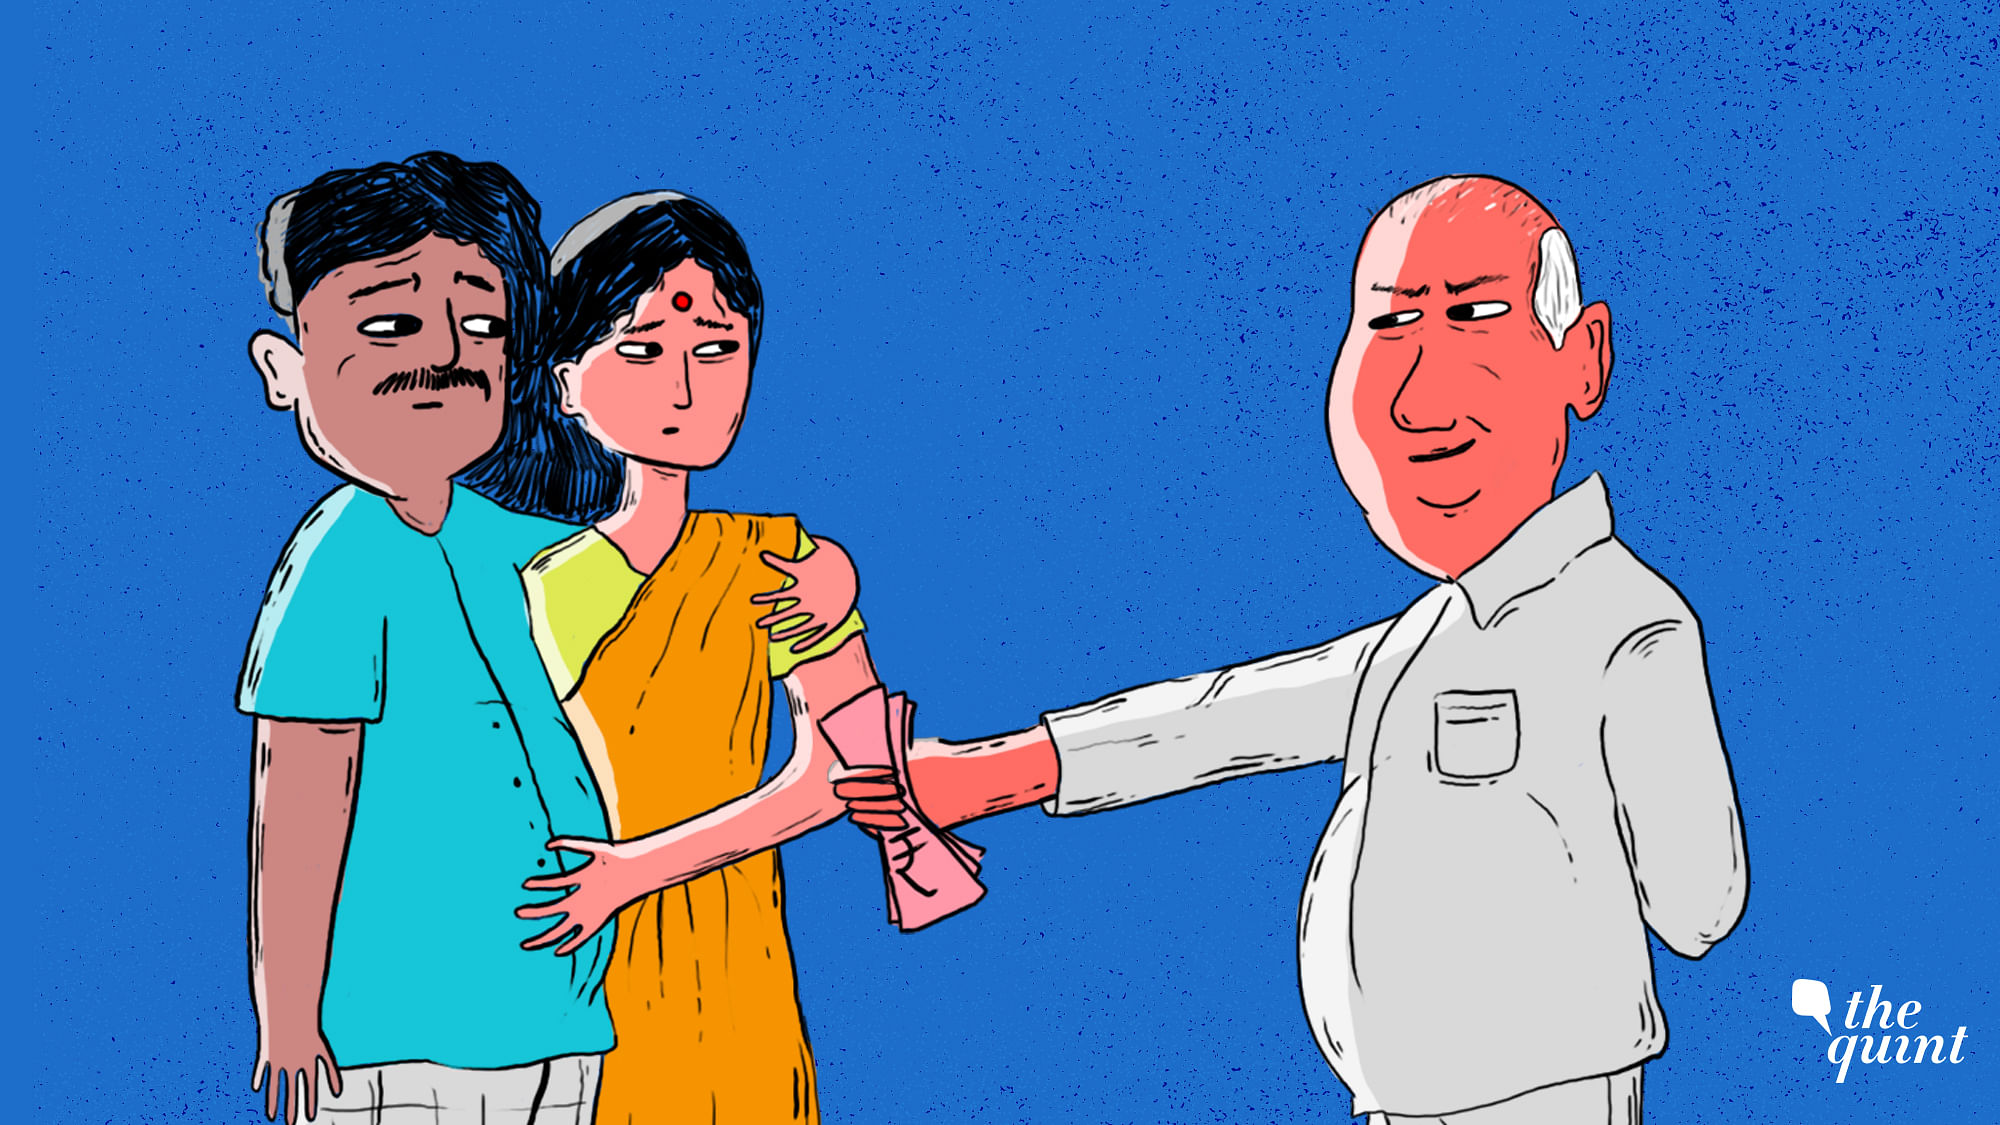 Rajagopal’s obsession with a married woman was based on an advice he received from an astrologer.